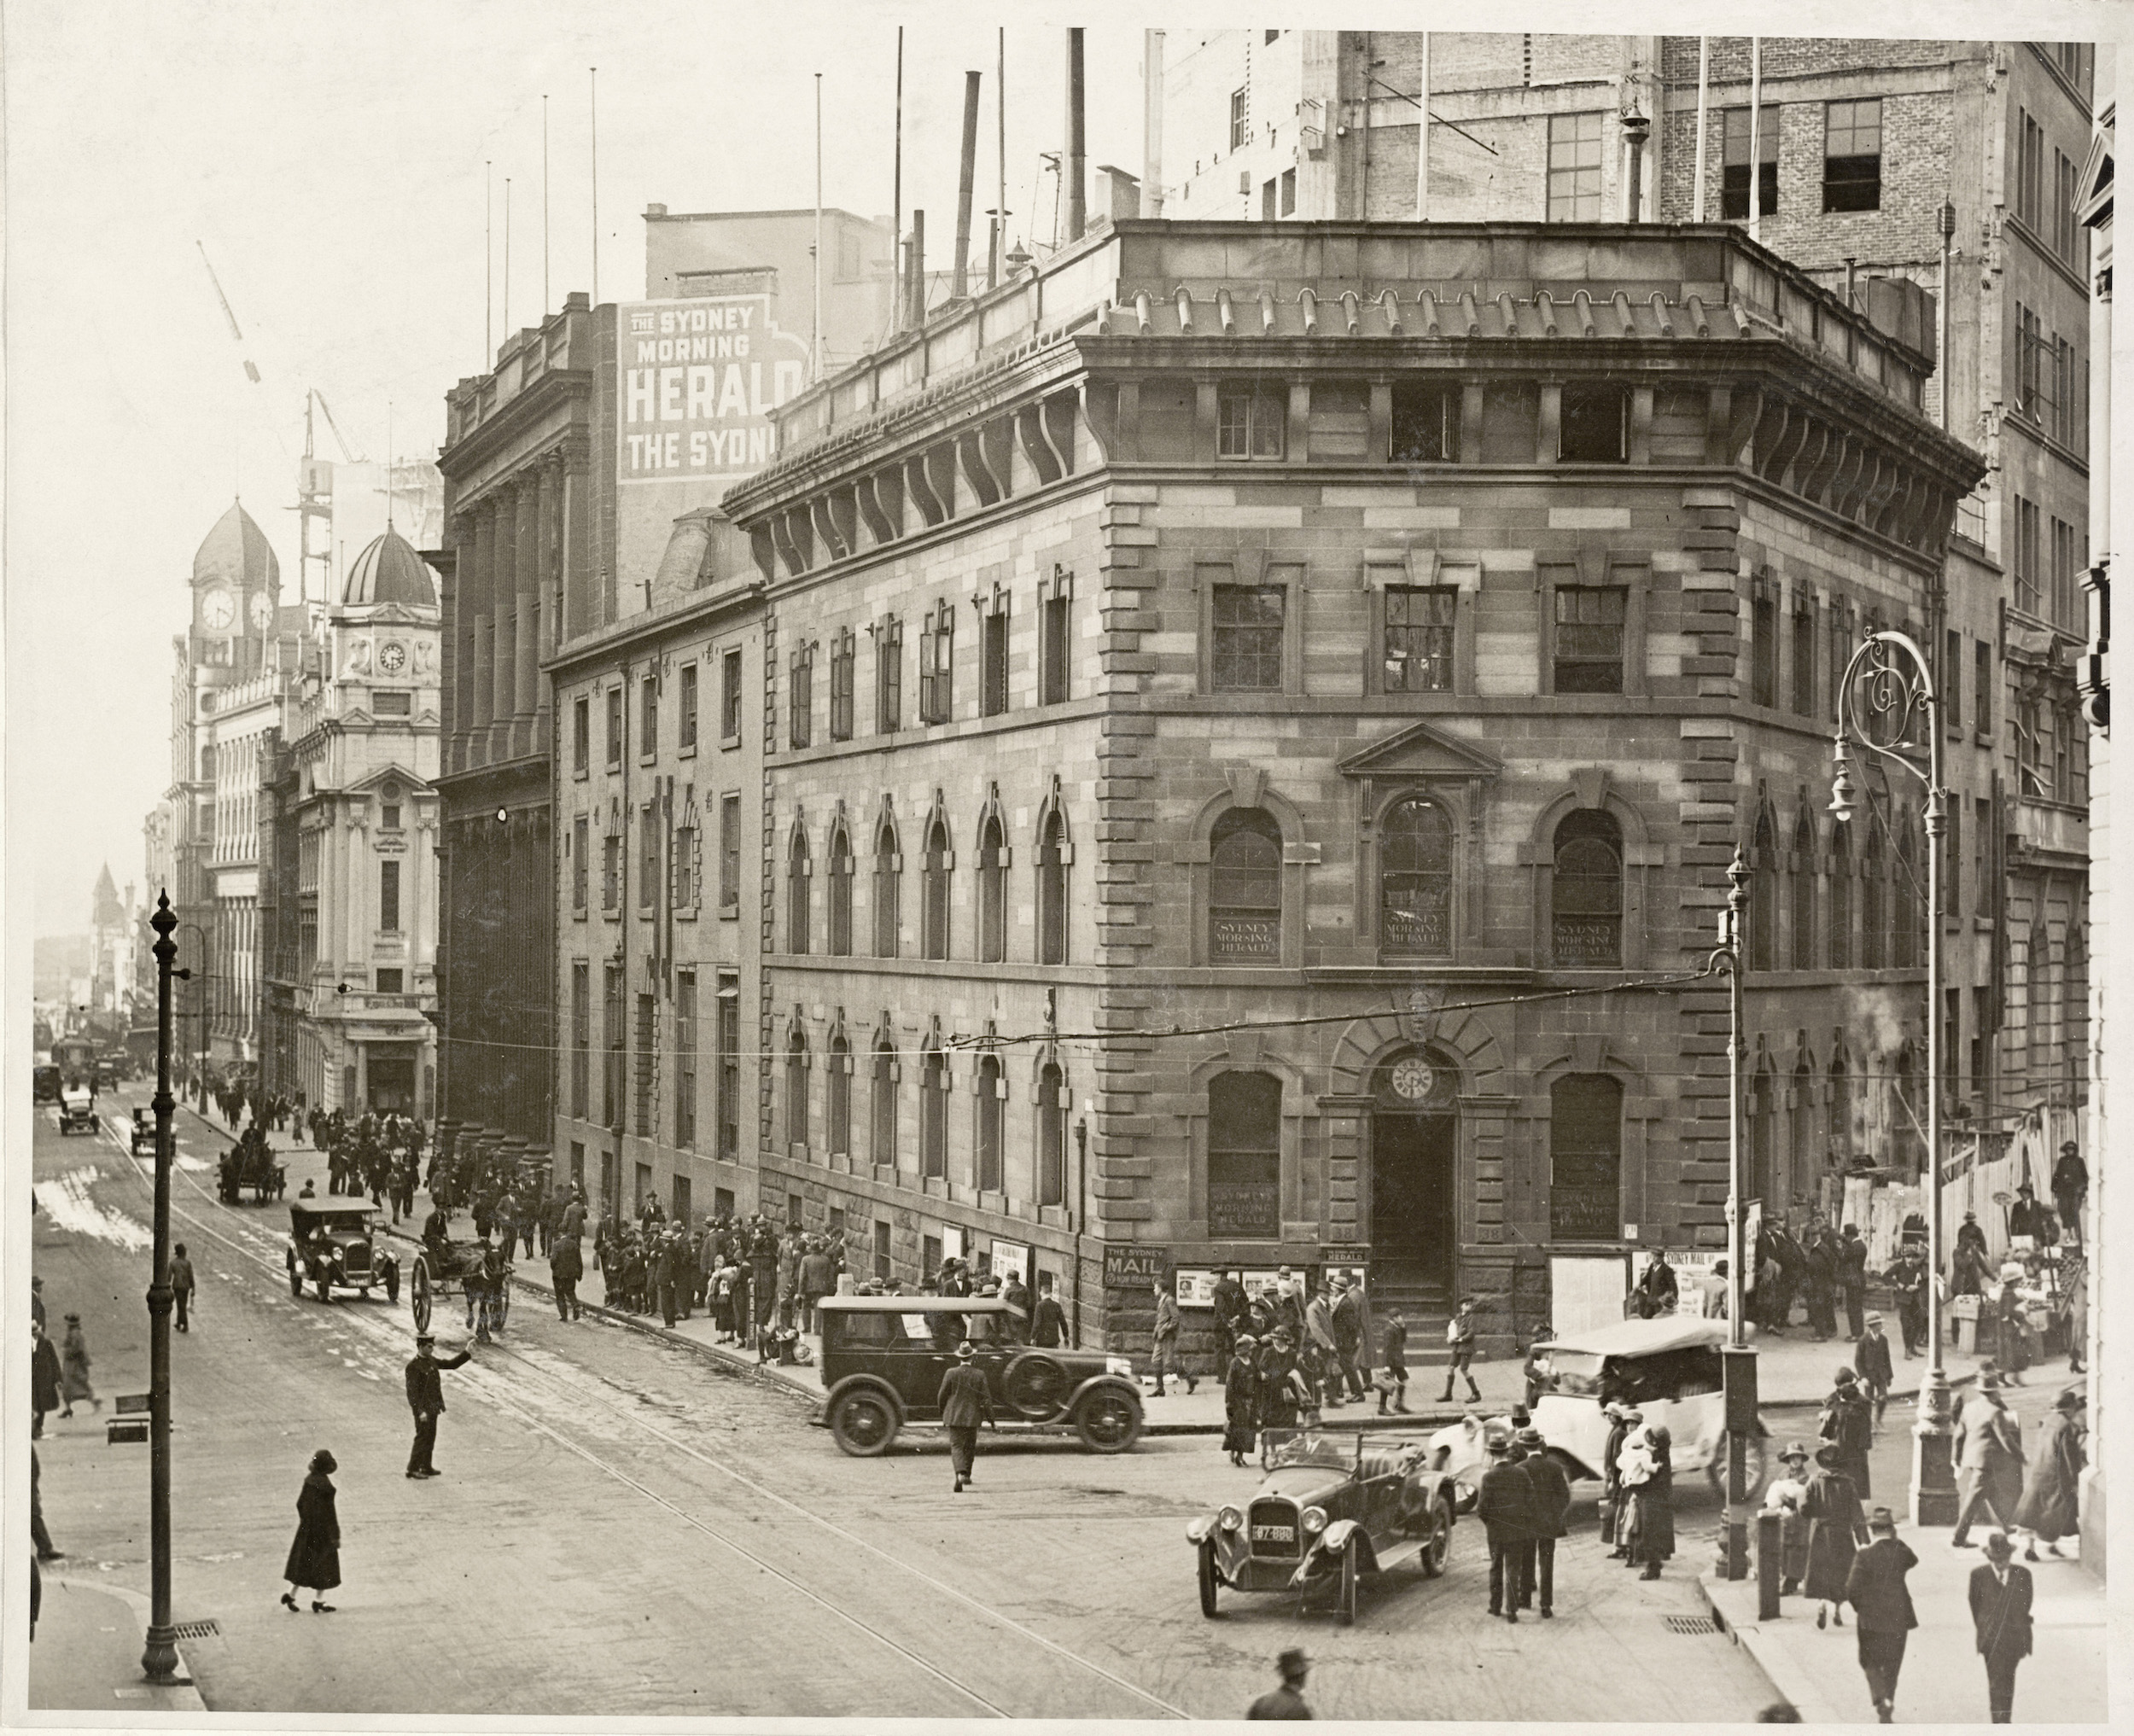 Herald building on the corner of Pitt and Hunter streets, c 1920s